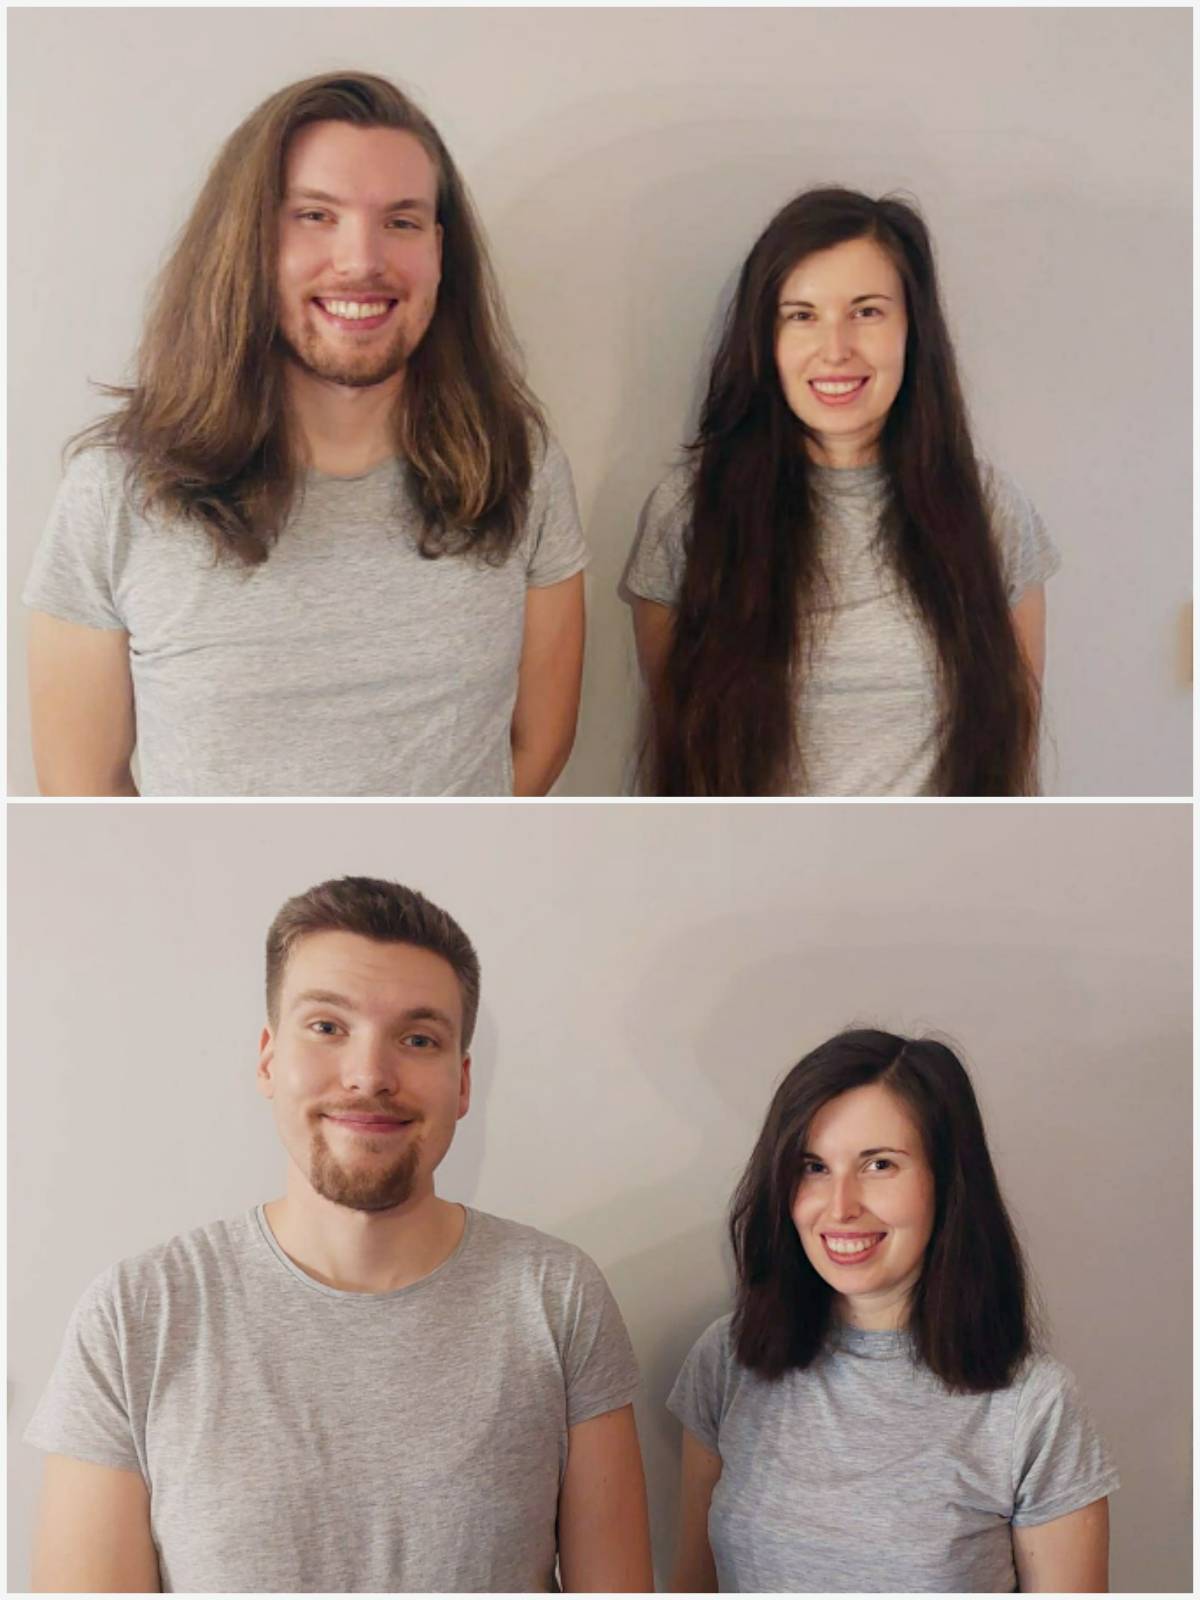 Brother and sister donated 35 and 40 cm of hair